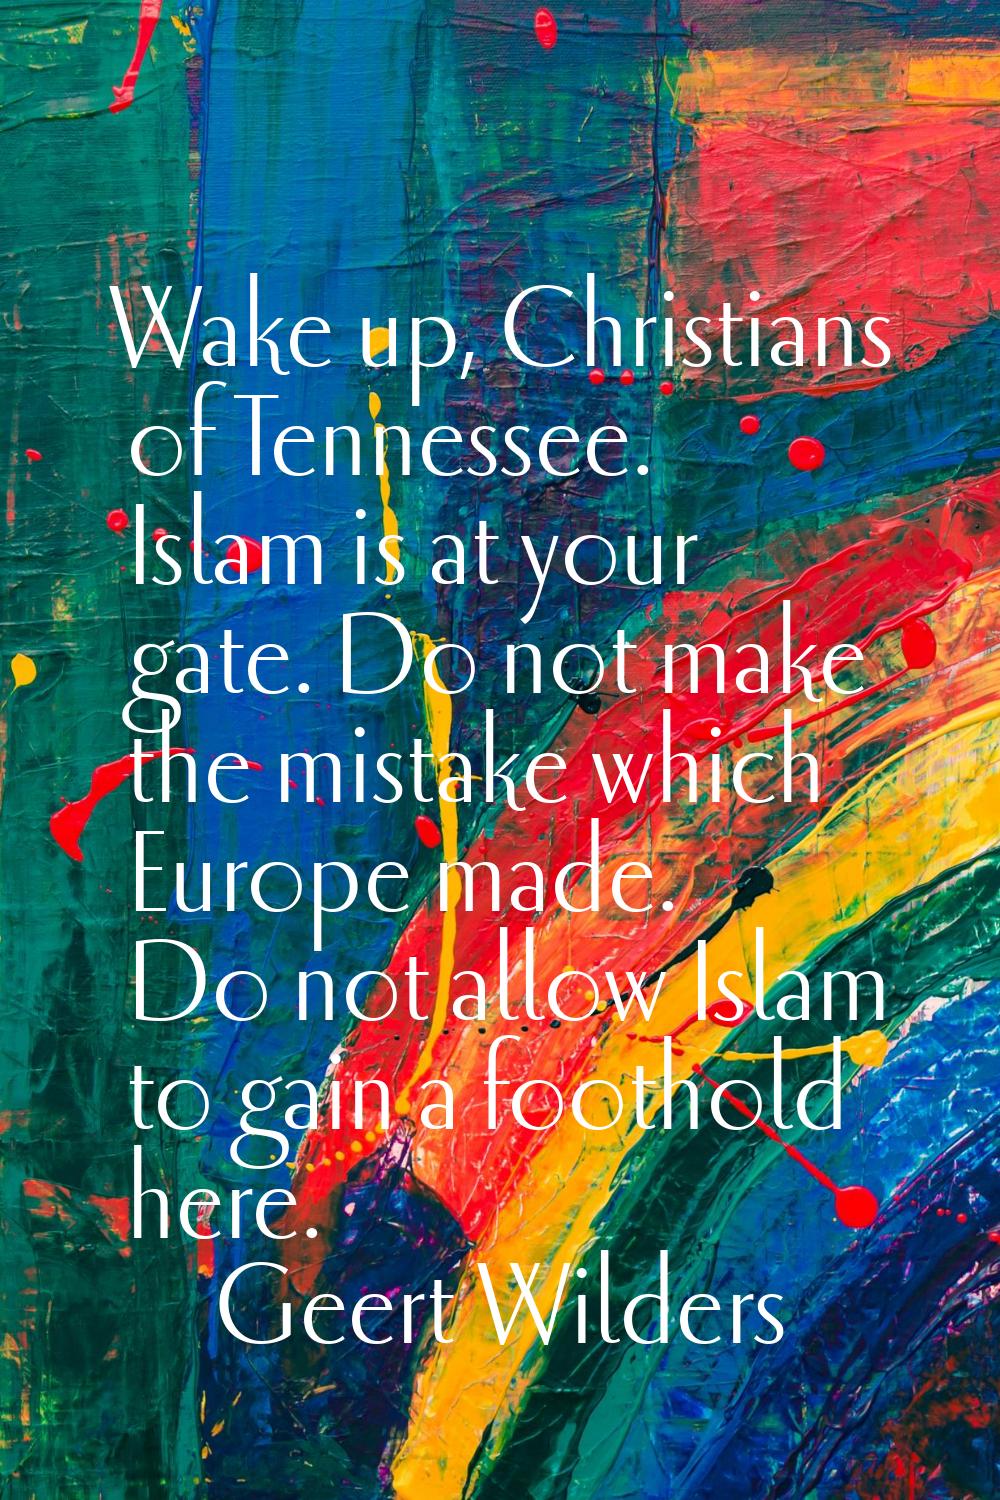 Wake up, Christians of Tennessee. Islam is at your gate. Do not make the mistake which Europe made.